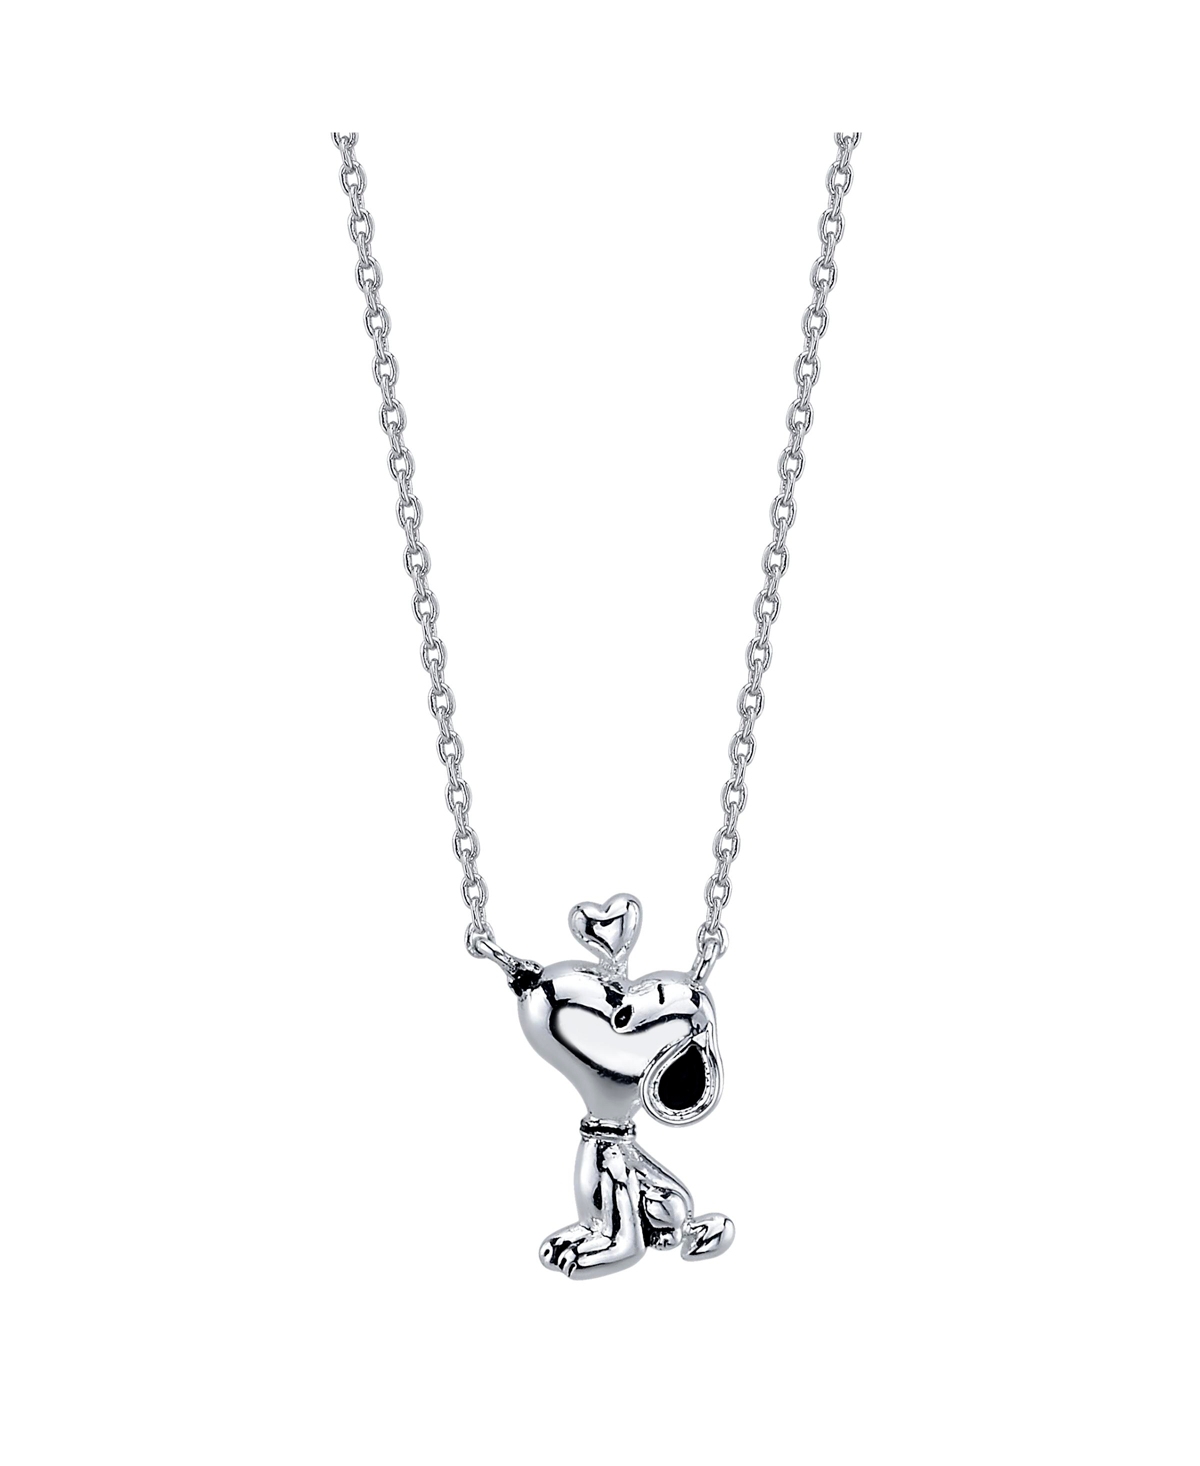 Unwritten Peanuts Snoopy Necklace in Silver Plate - Silver